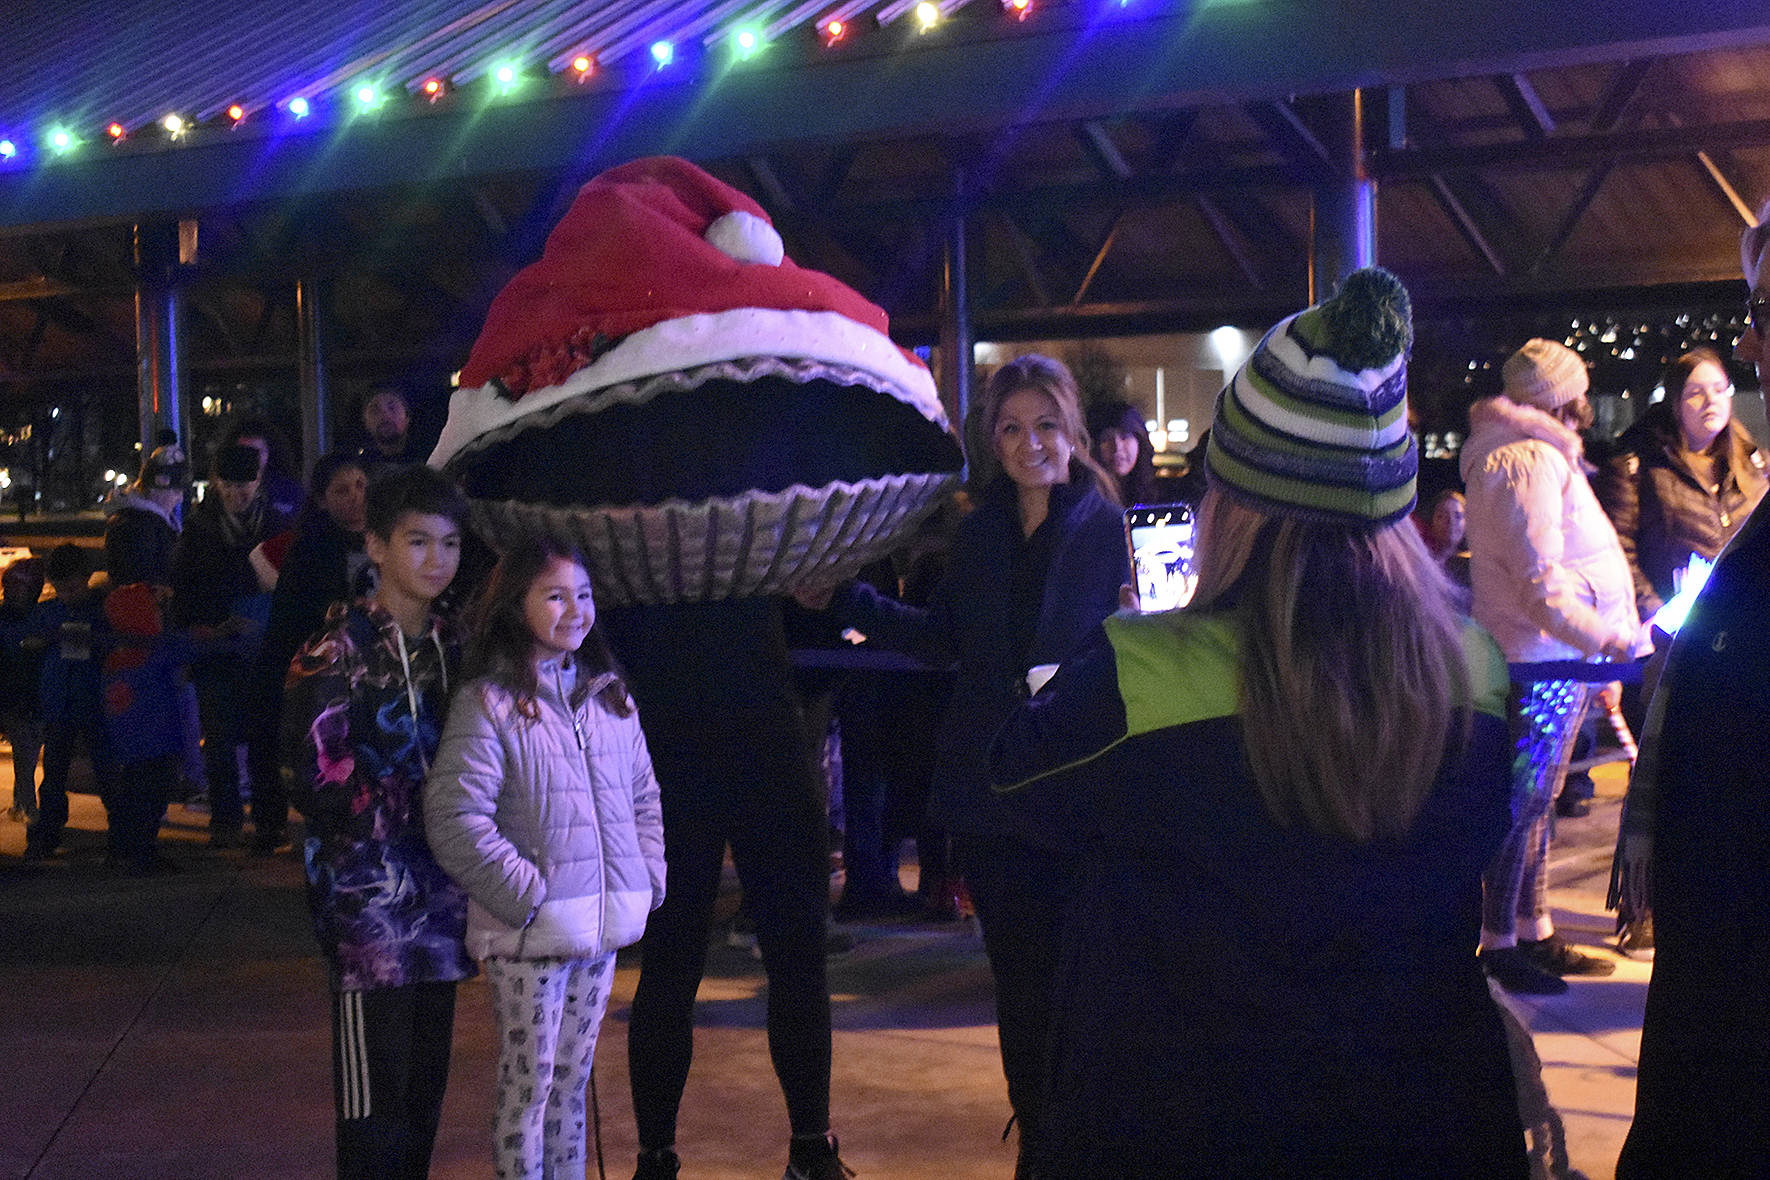 Spe-shell holiday lights featured in Renton